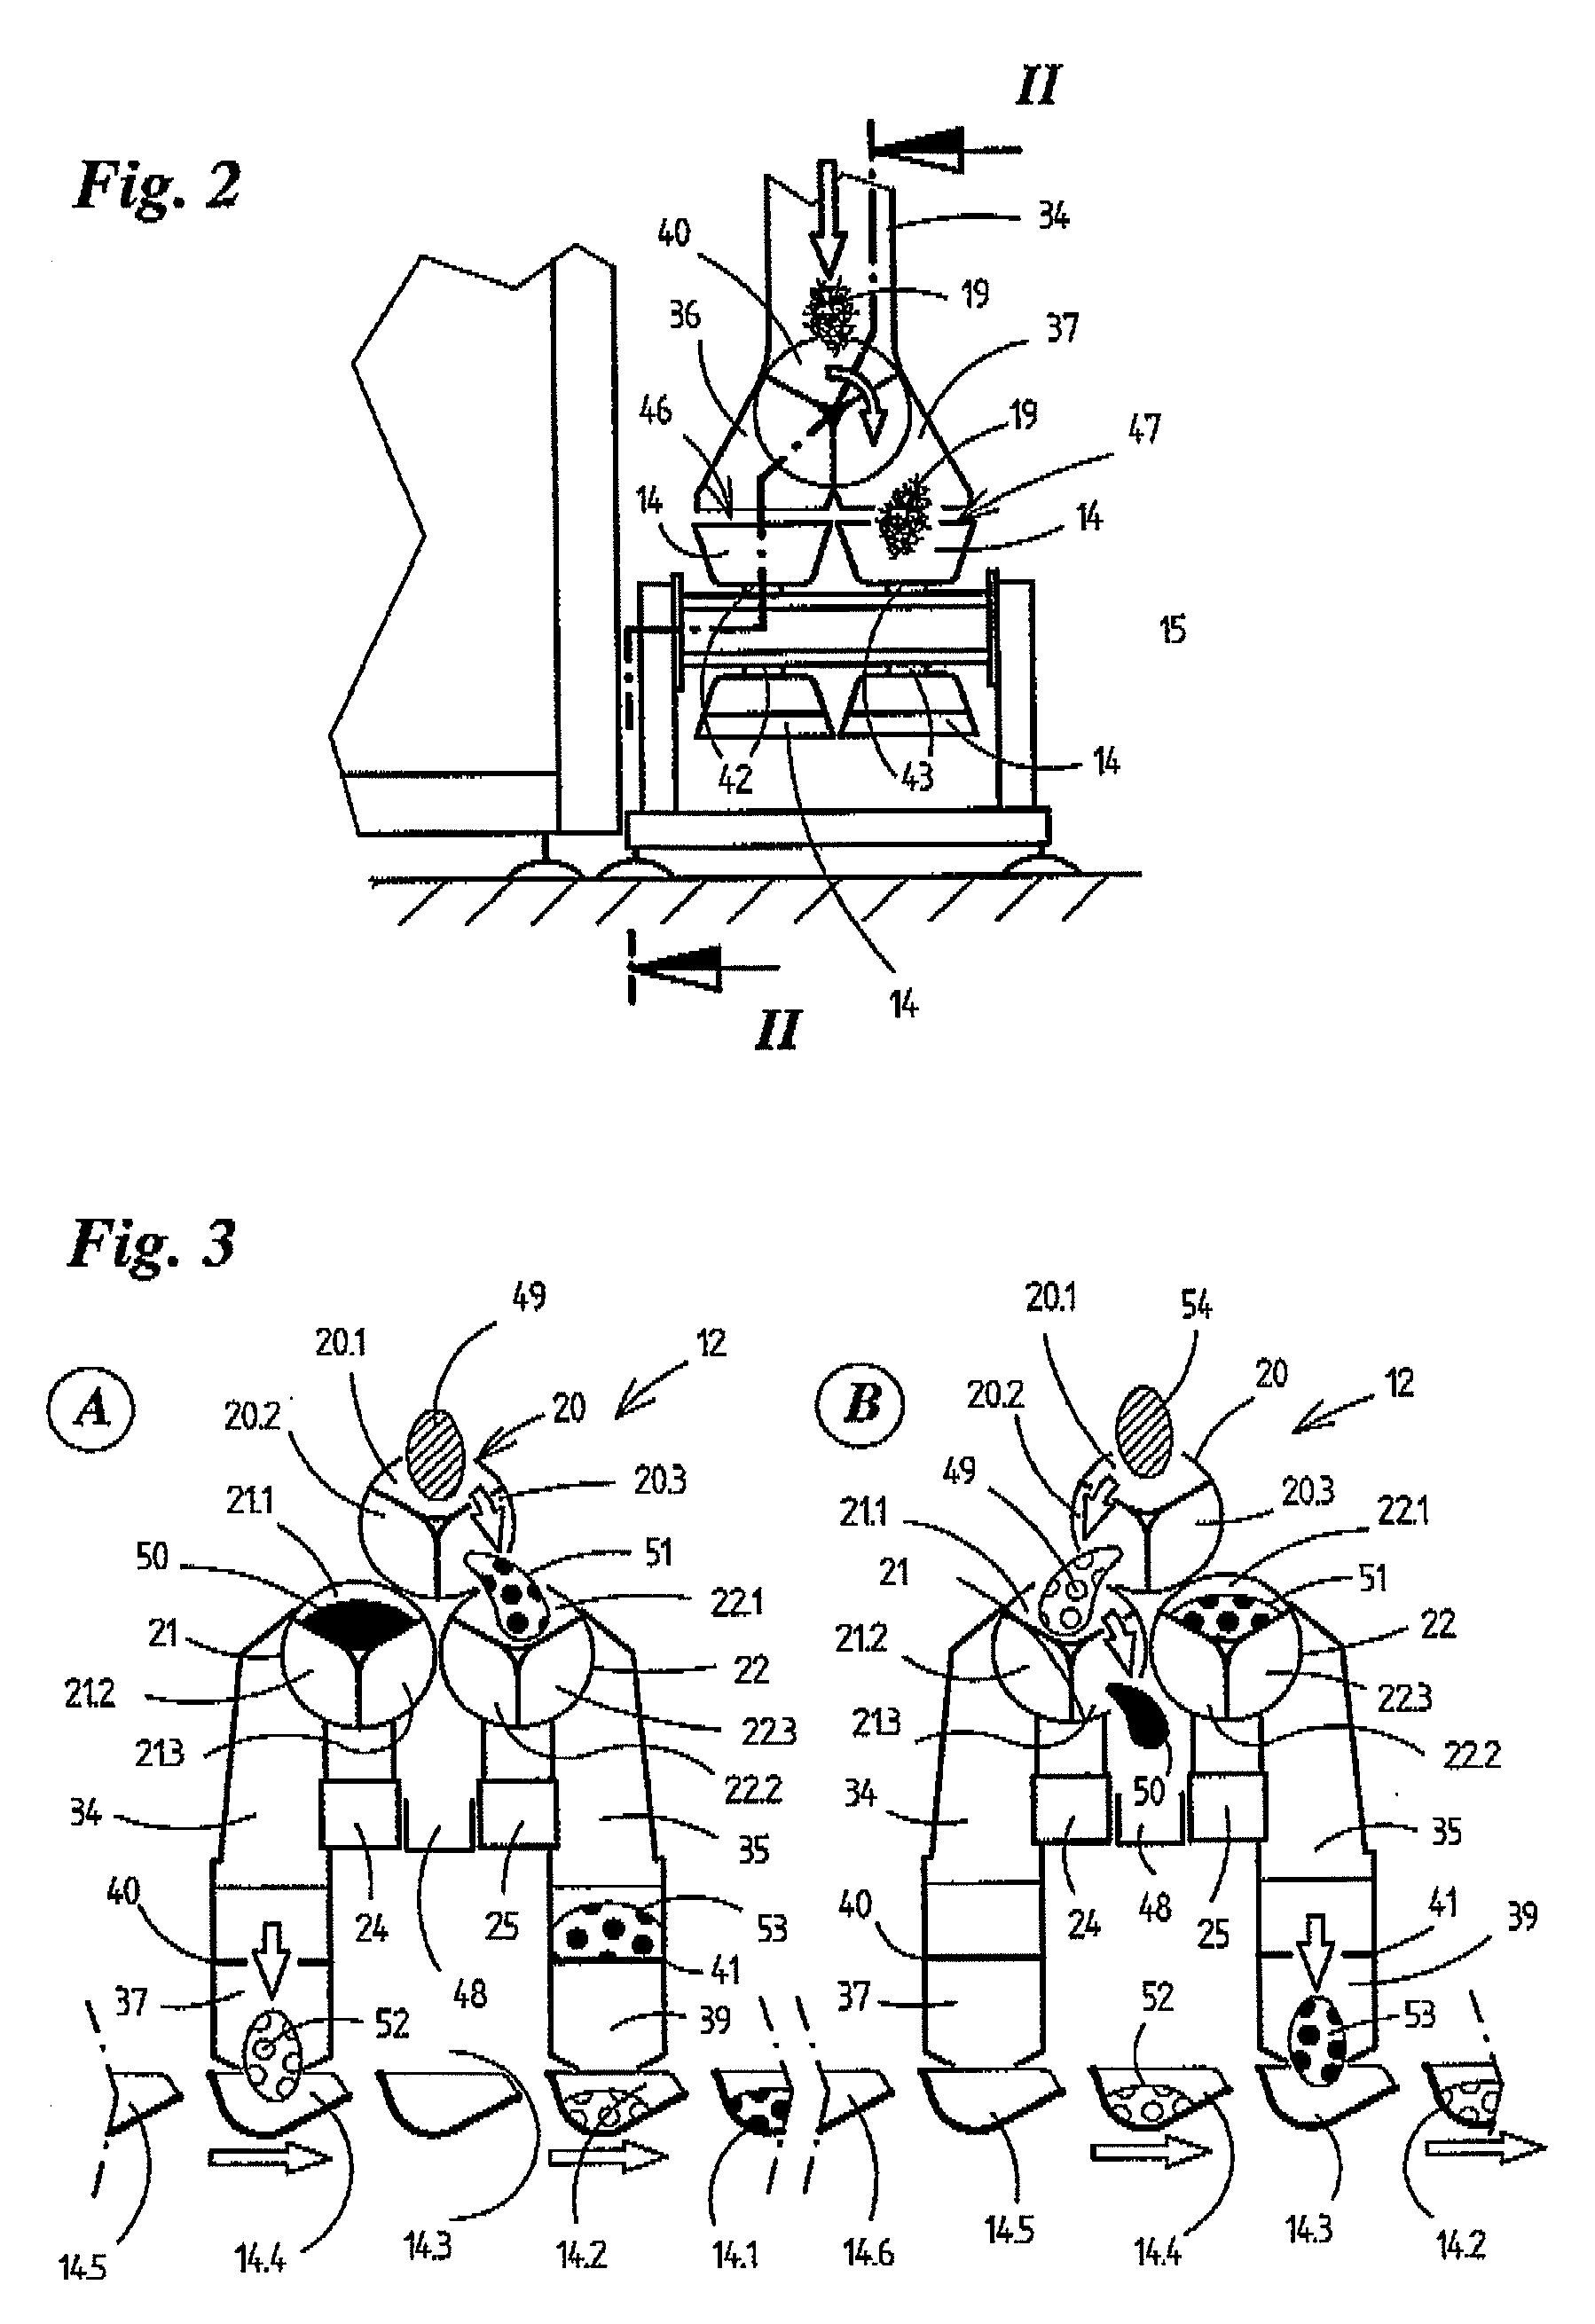 Method of, and apparatus for, forming portions of fibrous material and removing the same